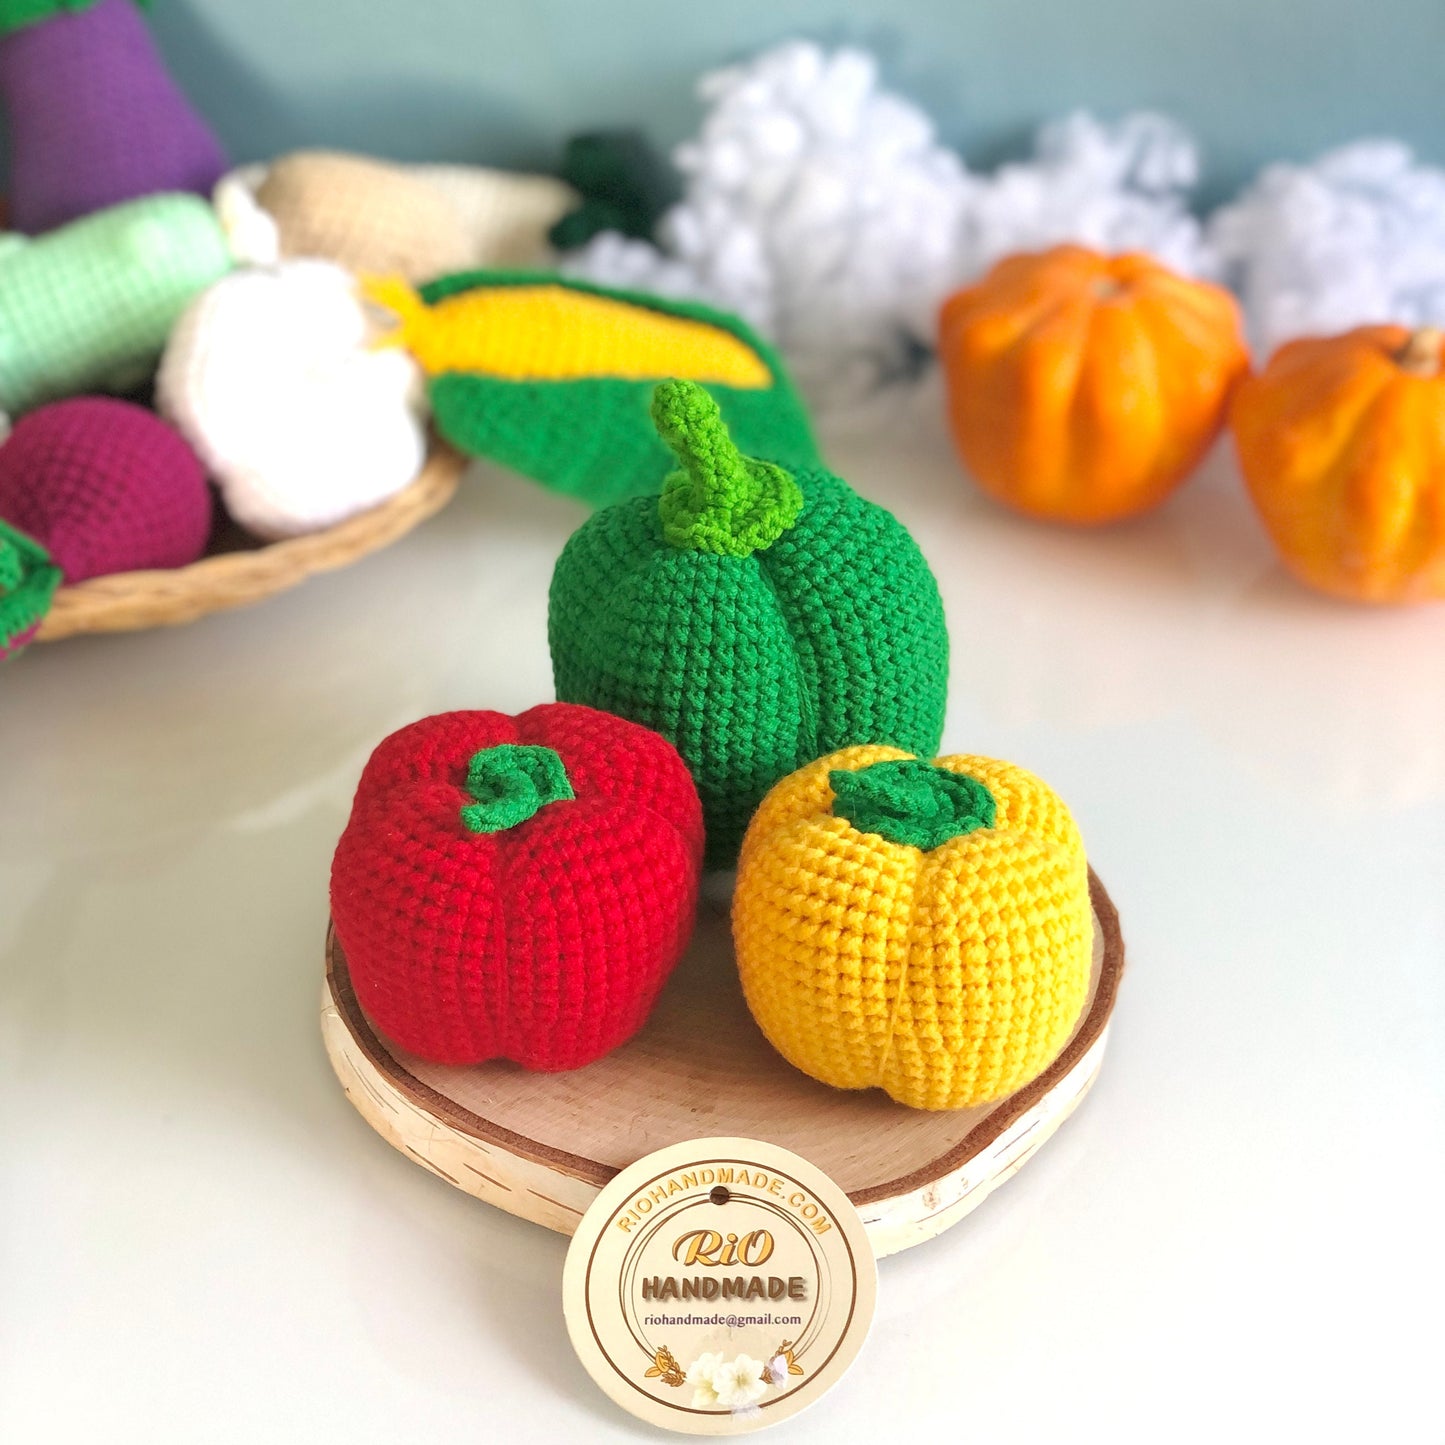 Crochet play vegetables and fruit set